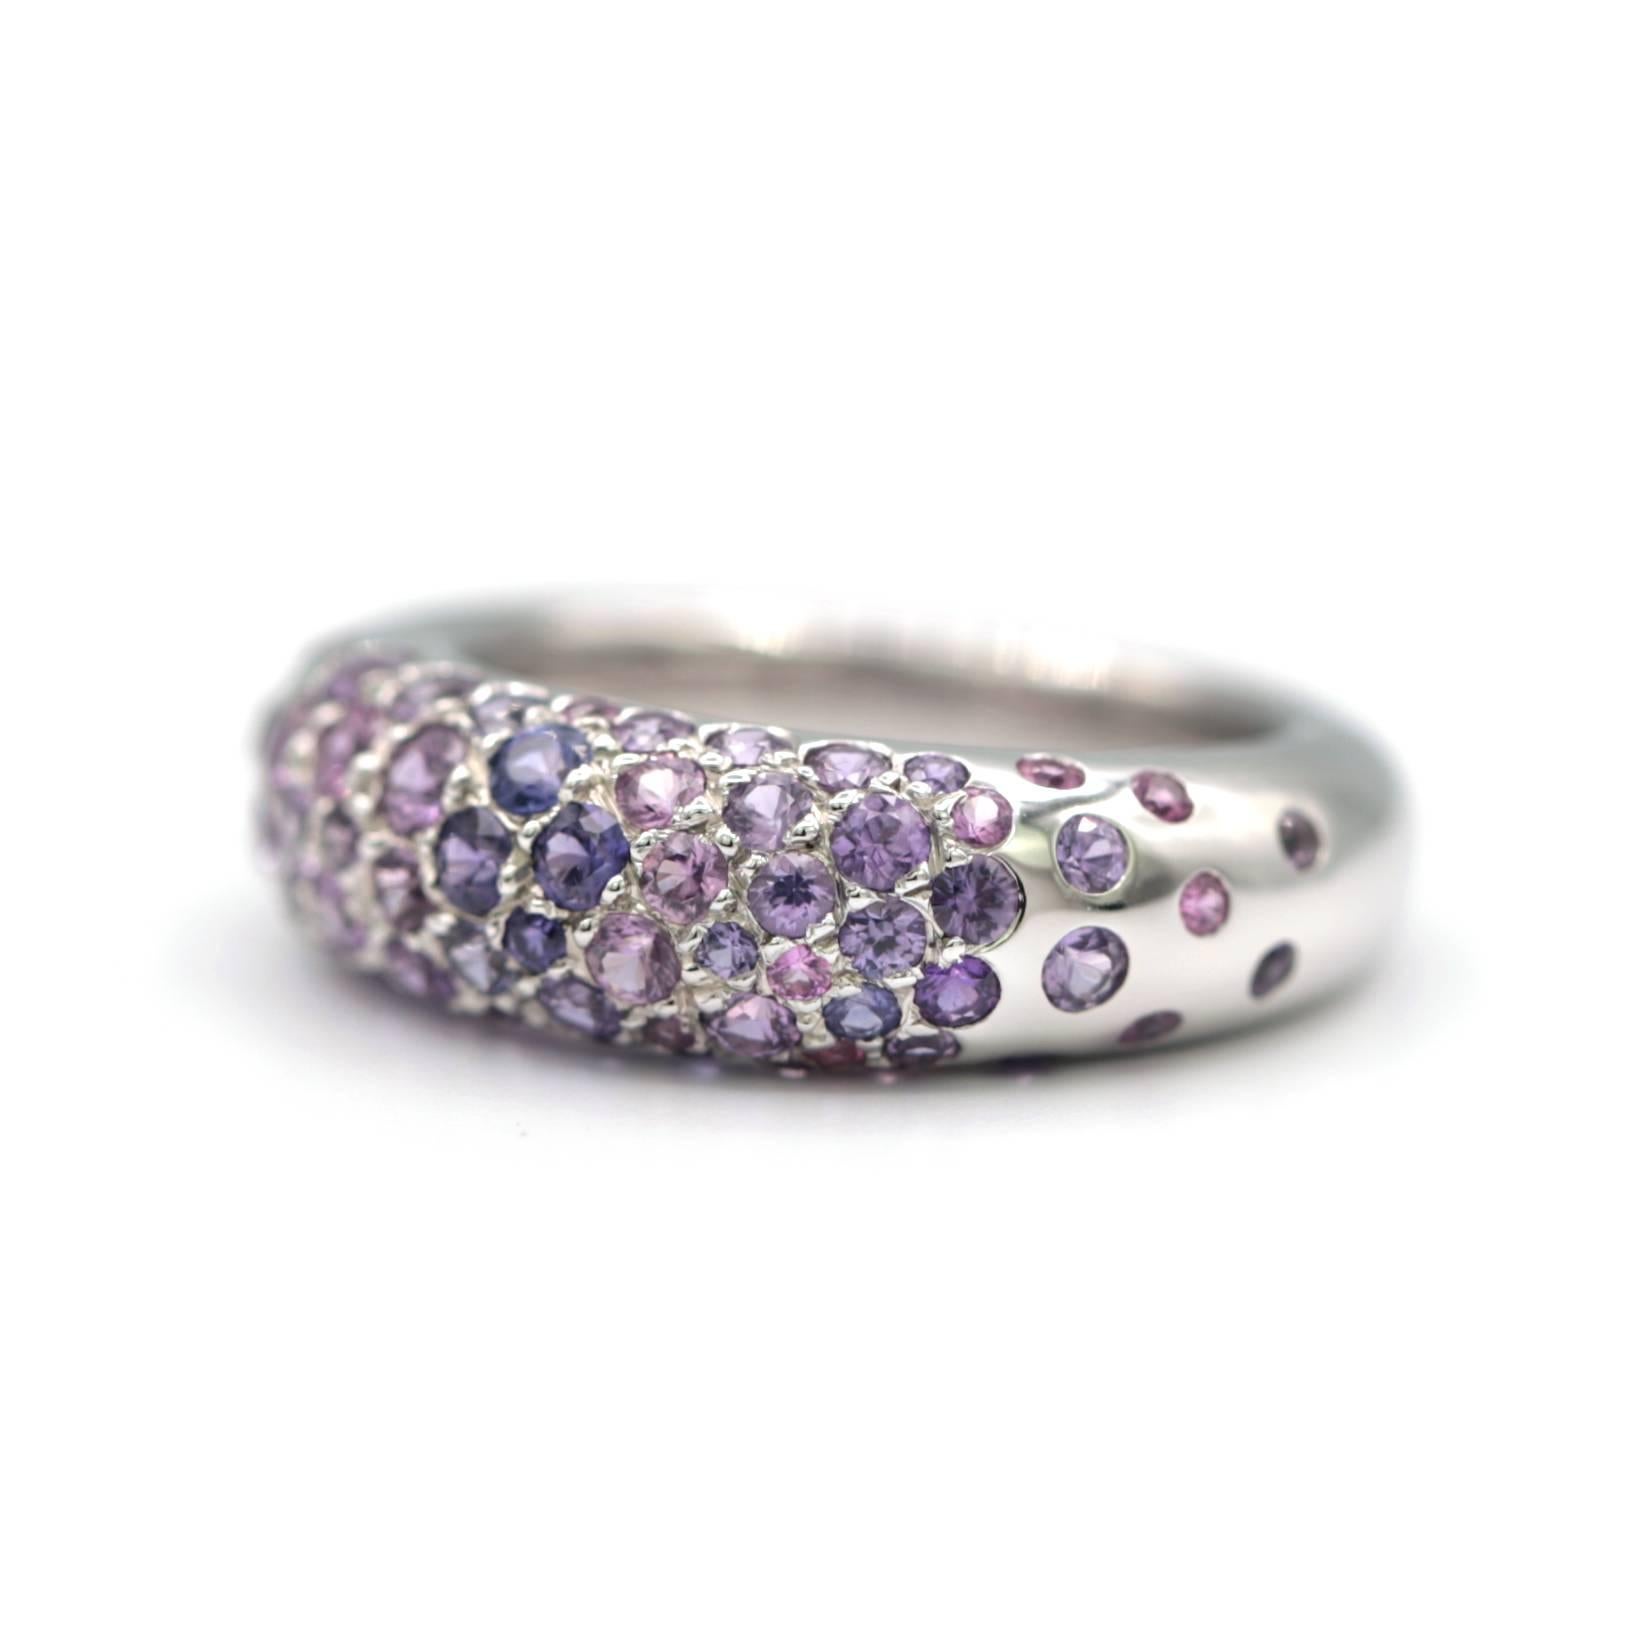 Modern Chaumet Blue and Purple 18 Karat White Gold Ring with 2 Carat Sapphires